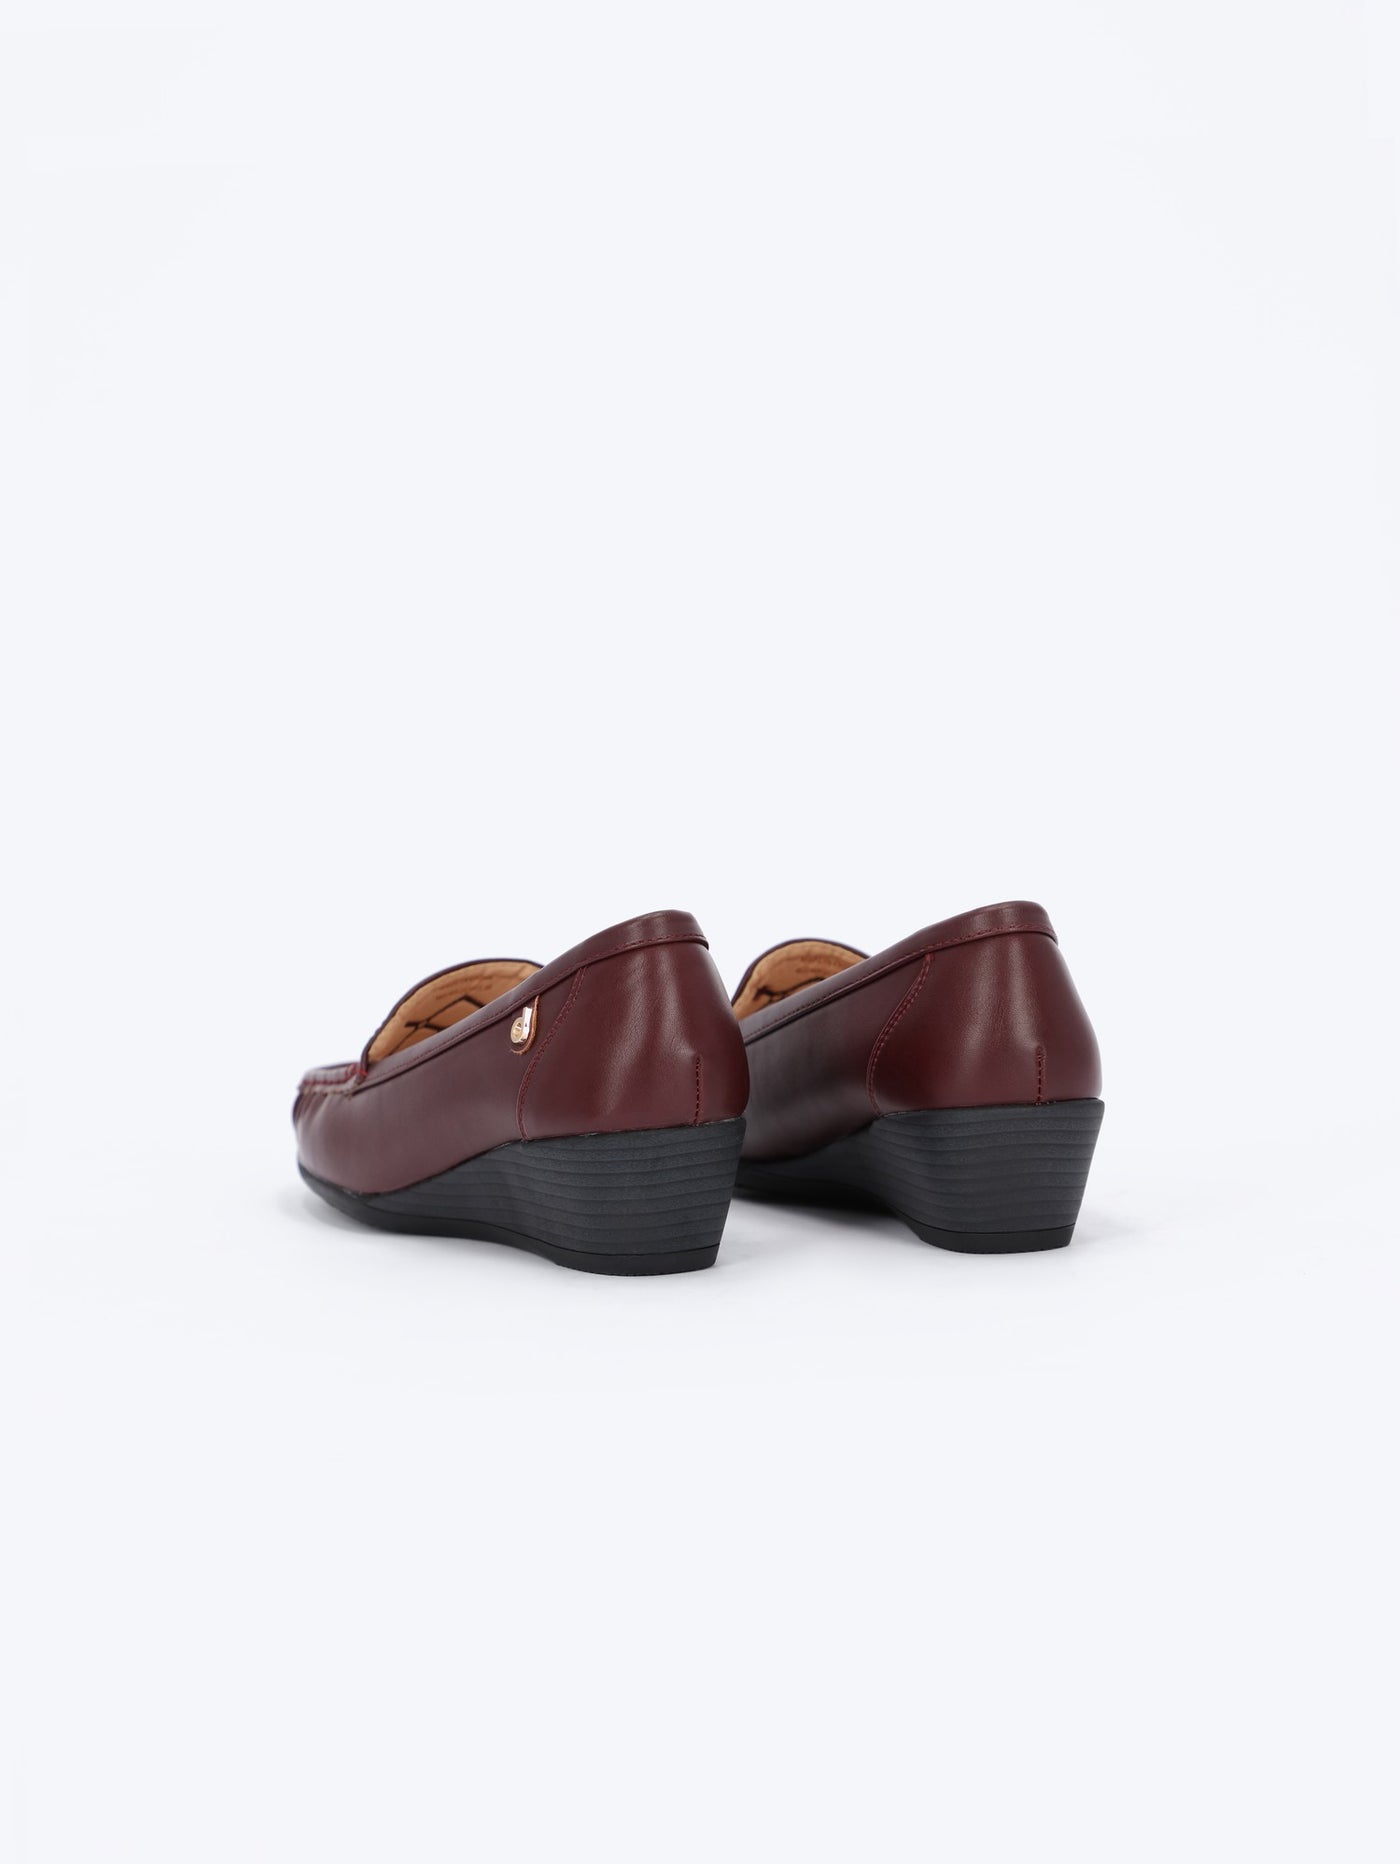 Wedge Loafers Heeled Shoes